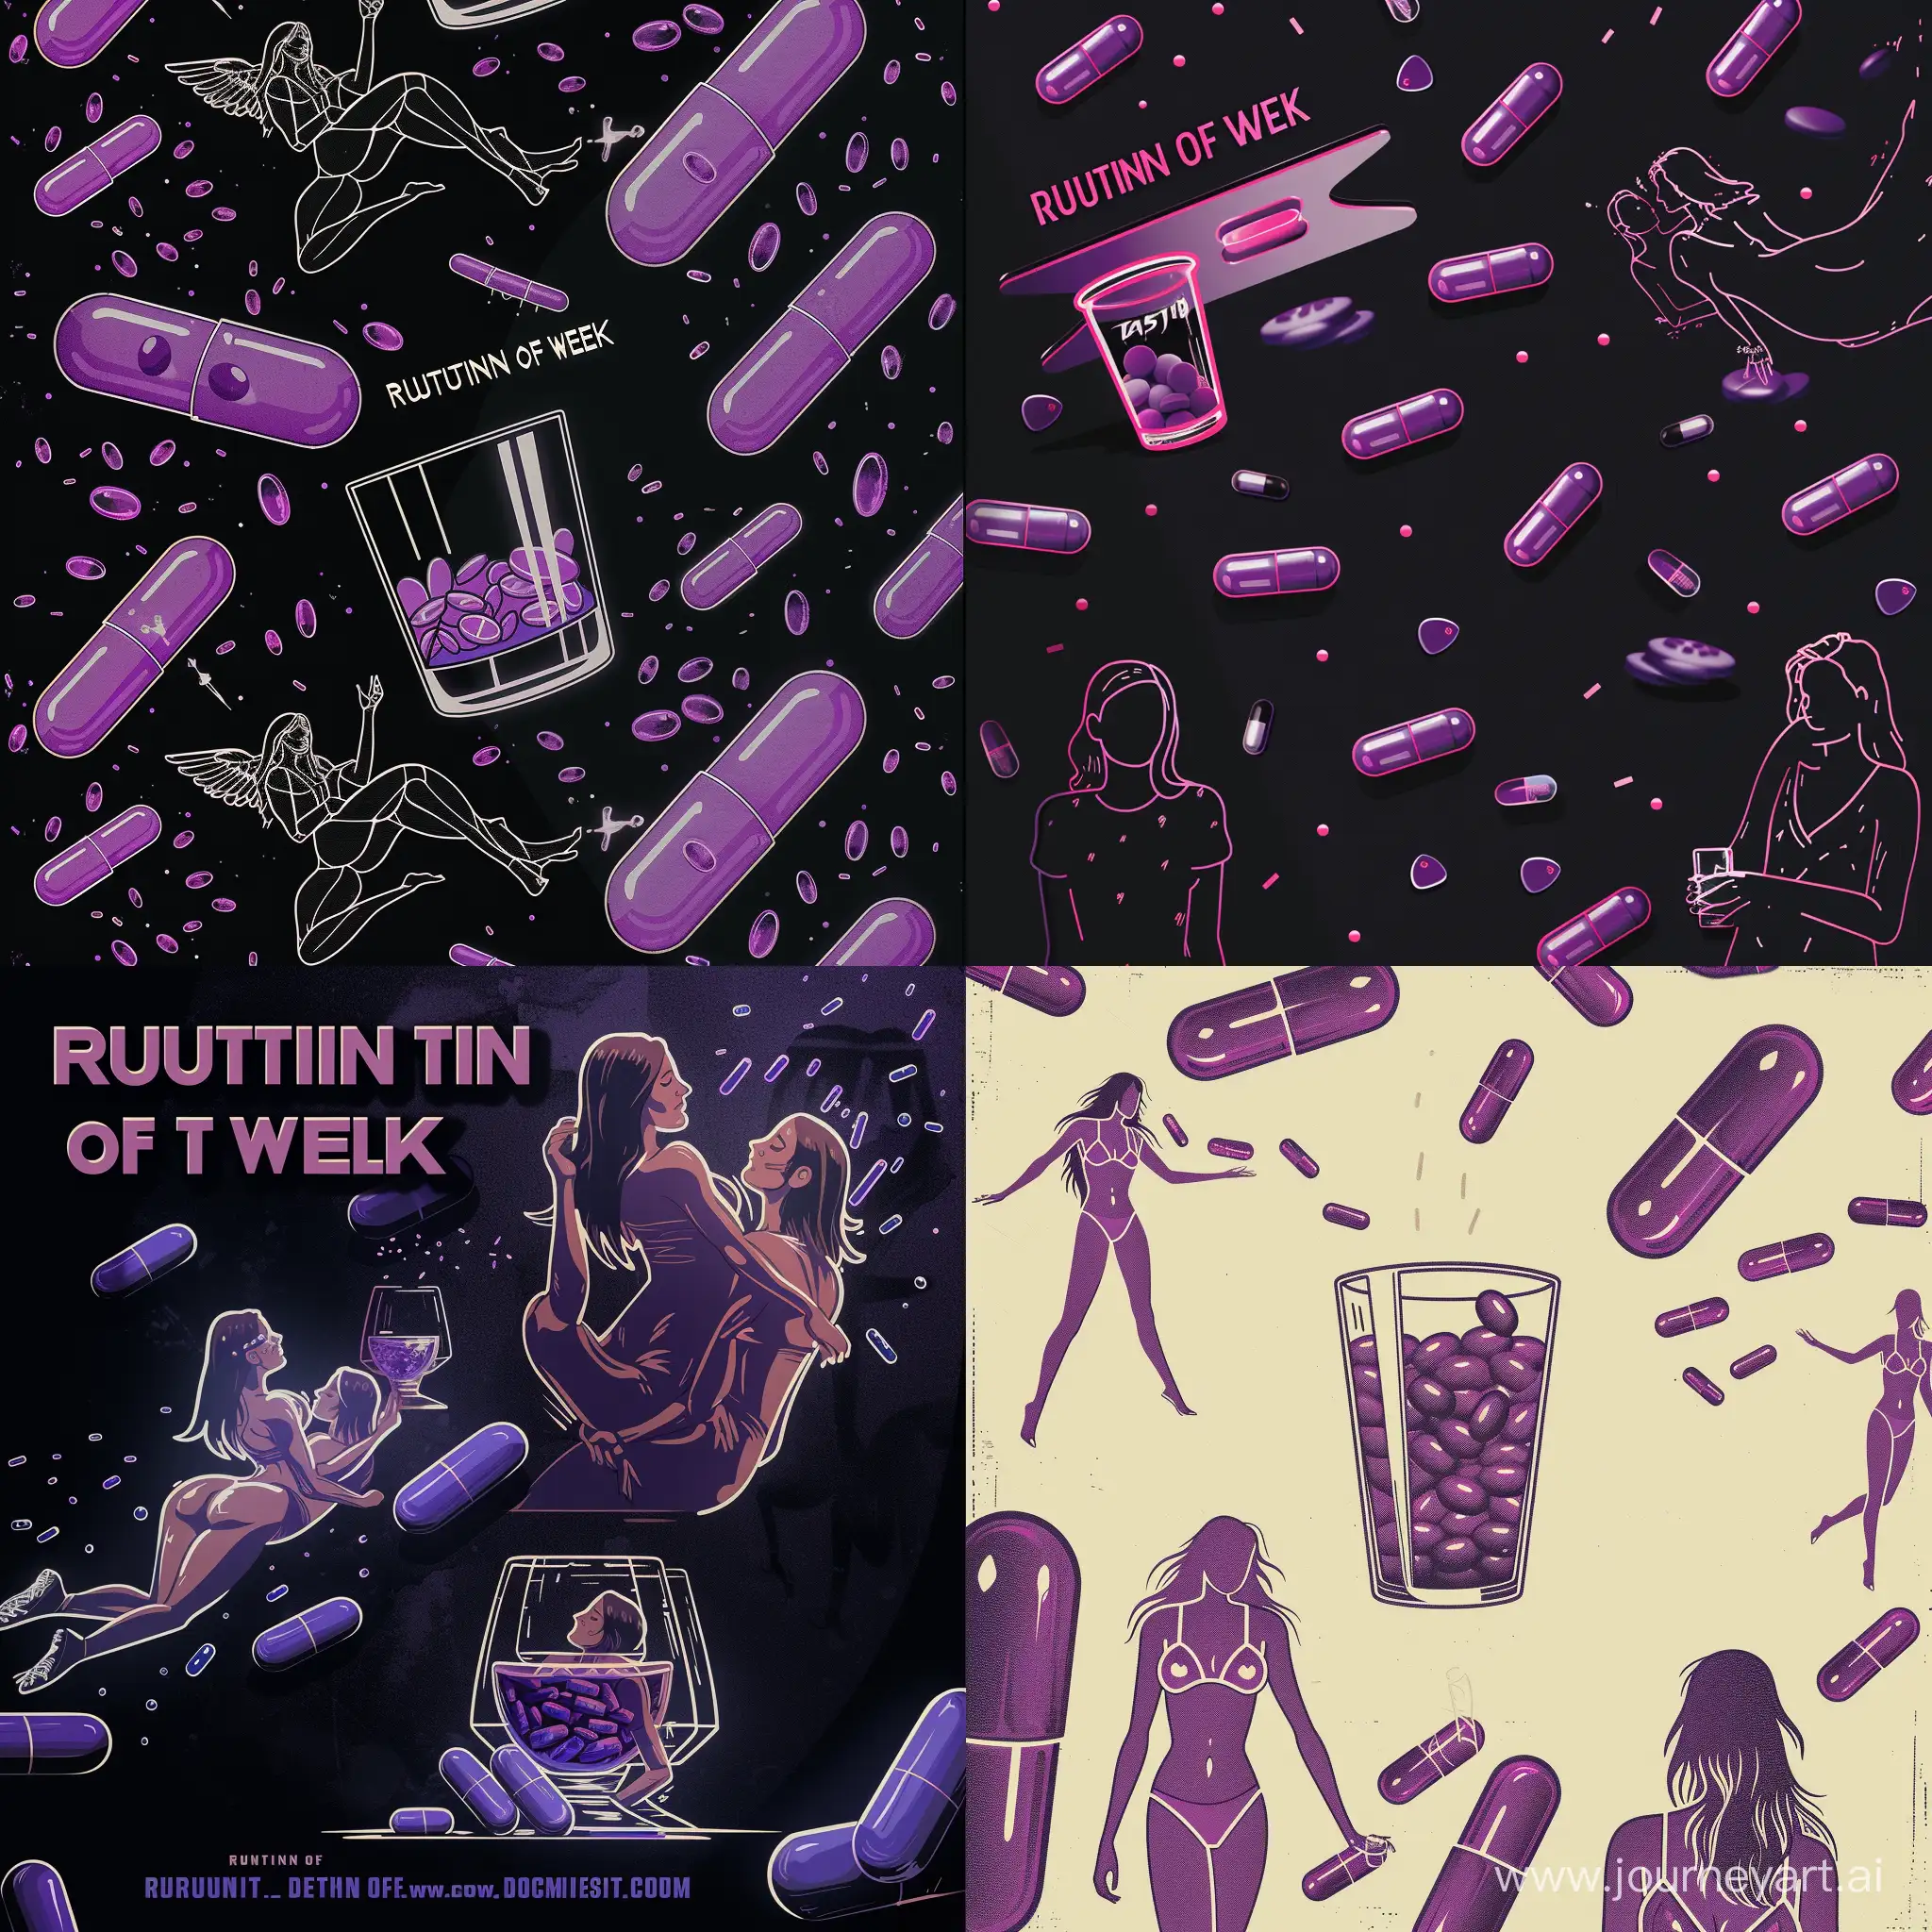 Generate an album cover with the title: "Routine of the week" pills should fly on the cover, there should be outlines of women and a glass with purple liquid